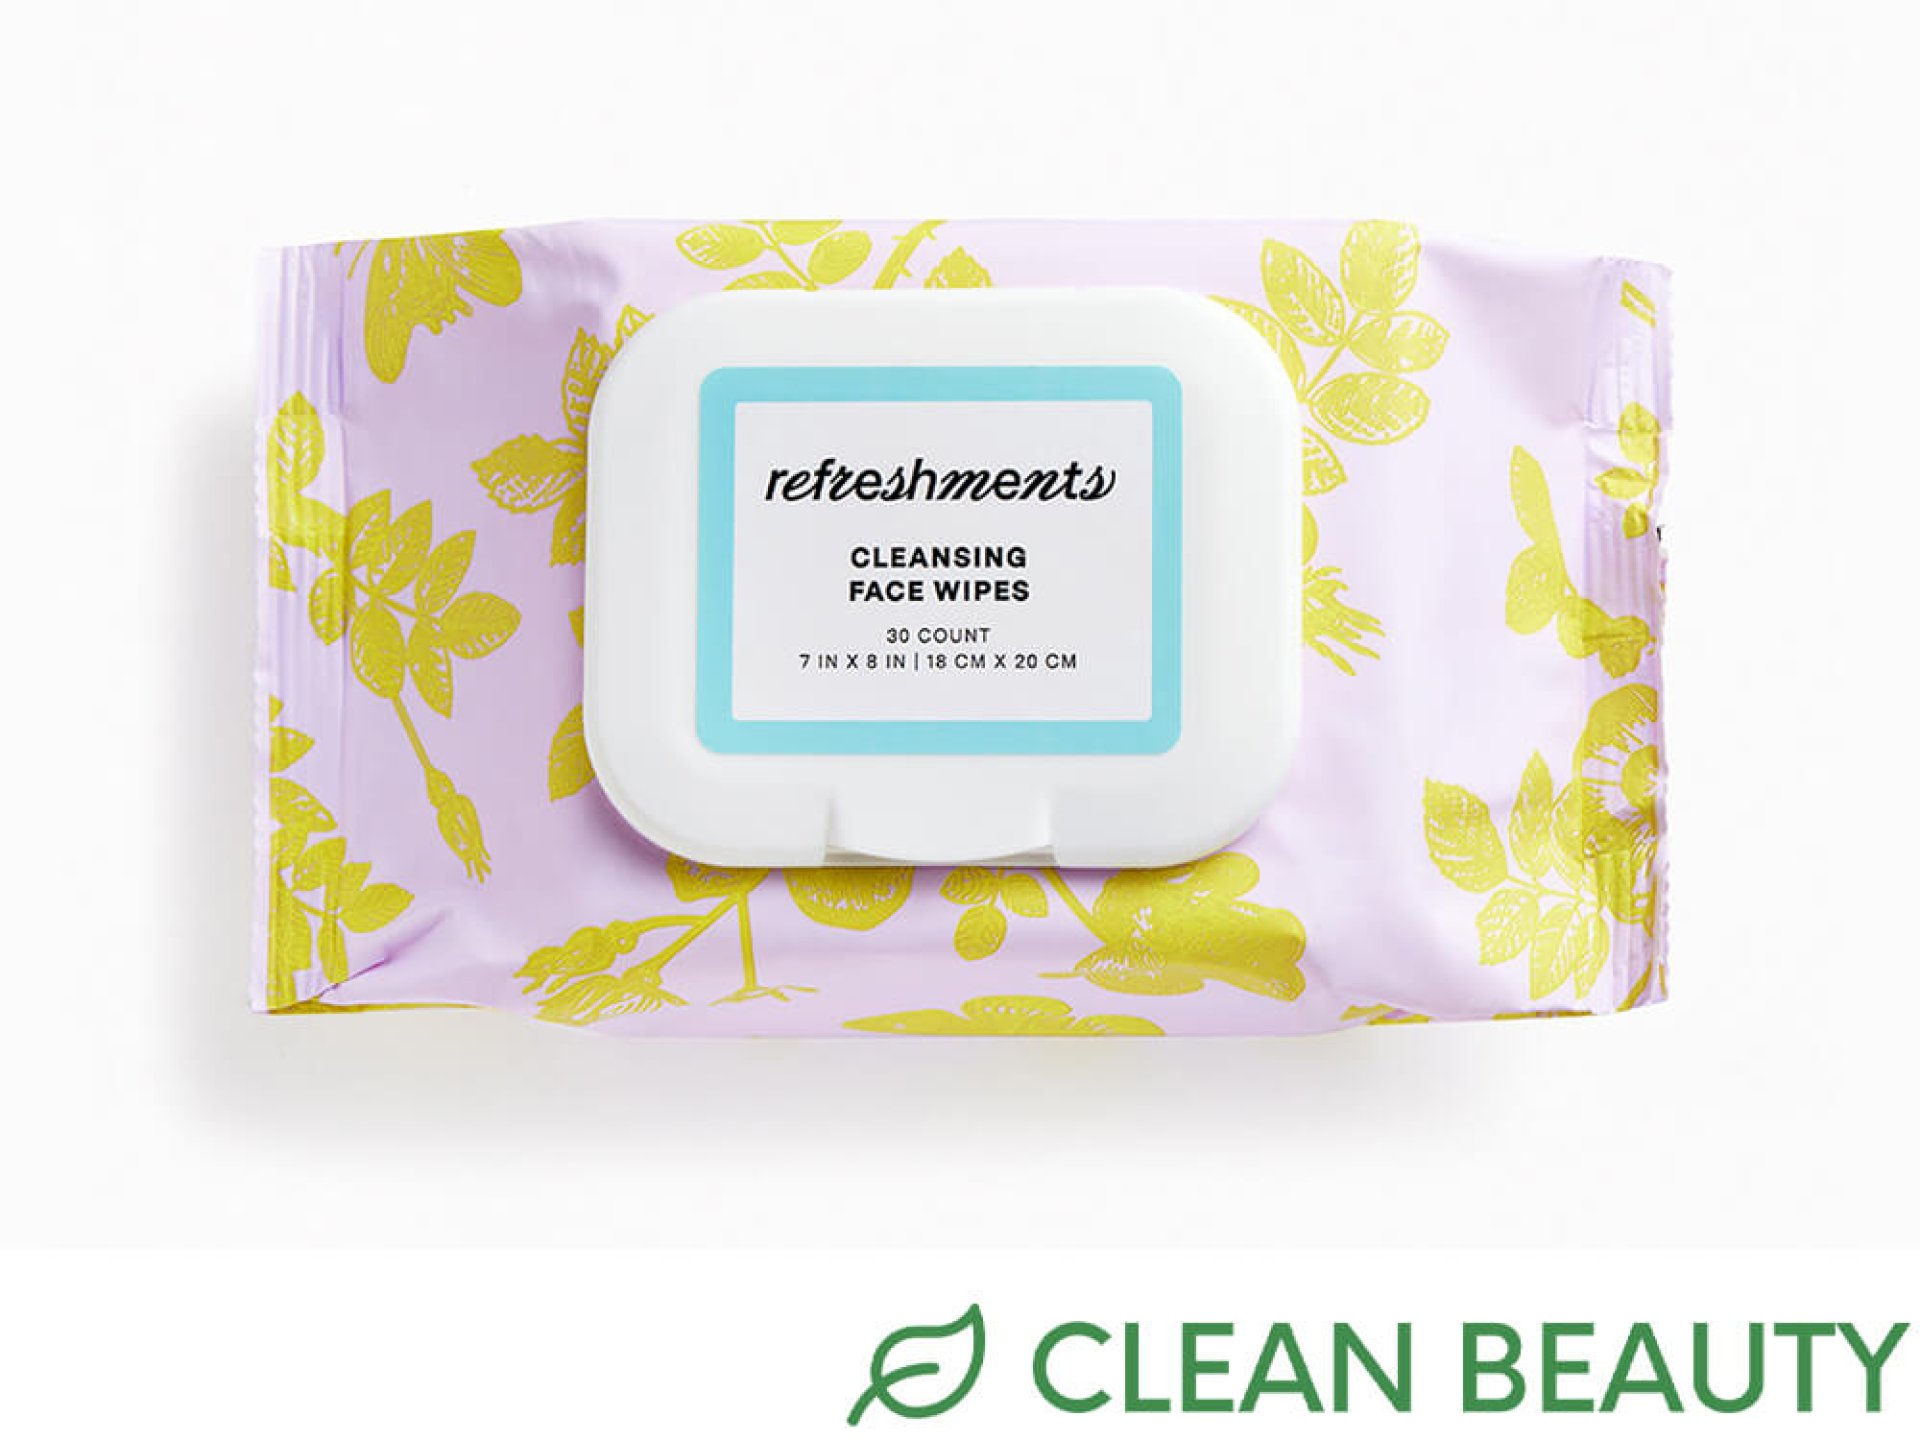 REFRESHMENTS Cleansing Face Wipes_Clean